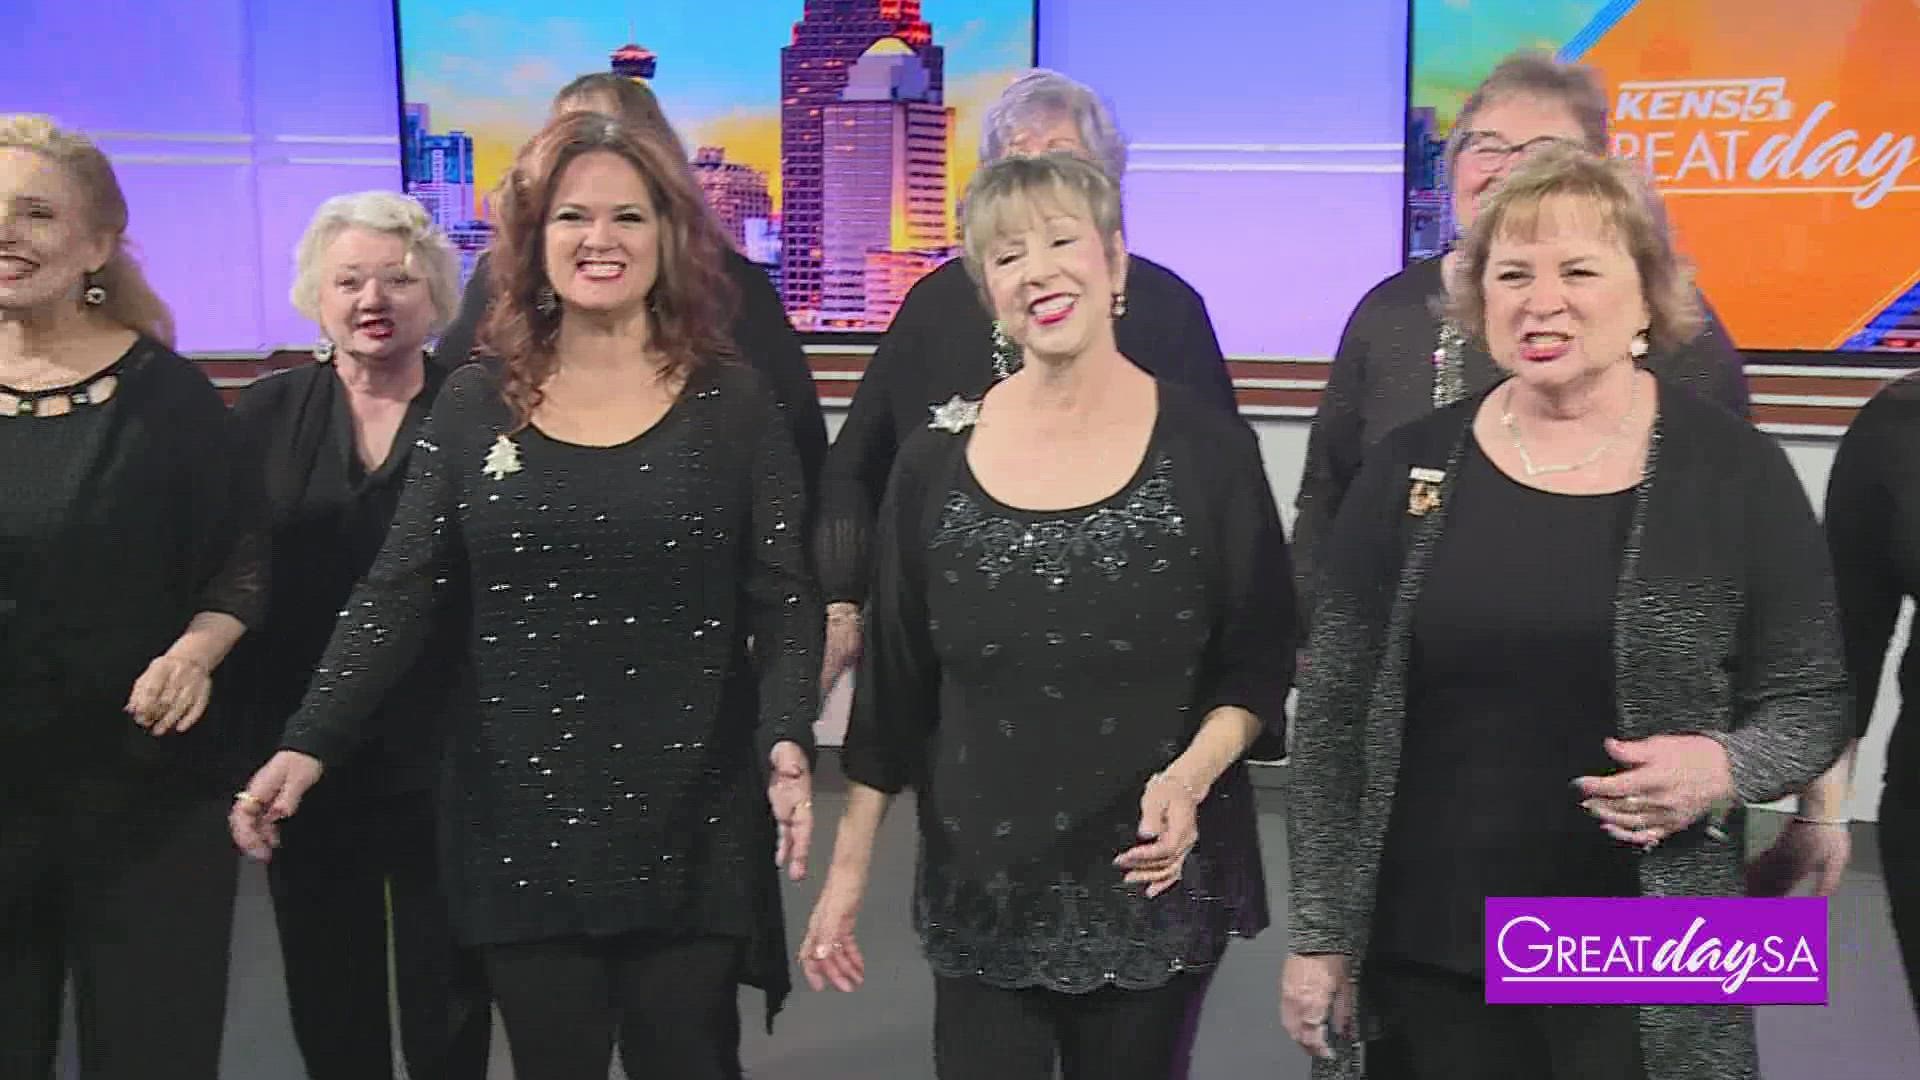 Get into the holiday spirit with the sounds of the Alamo Metro Chorus as they prepare for their holiday show this season.